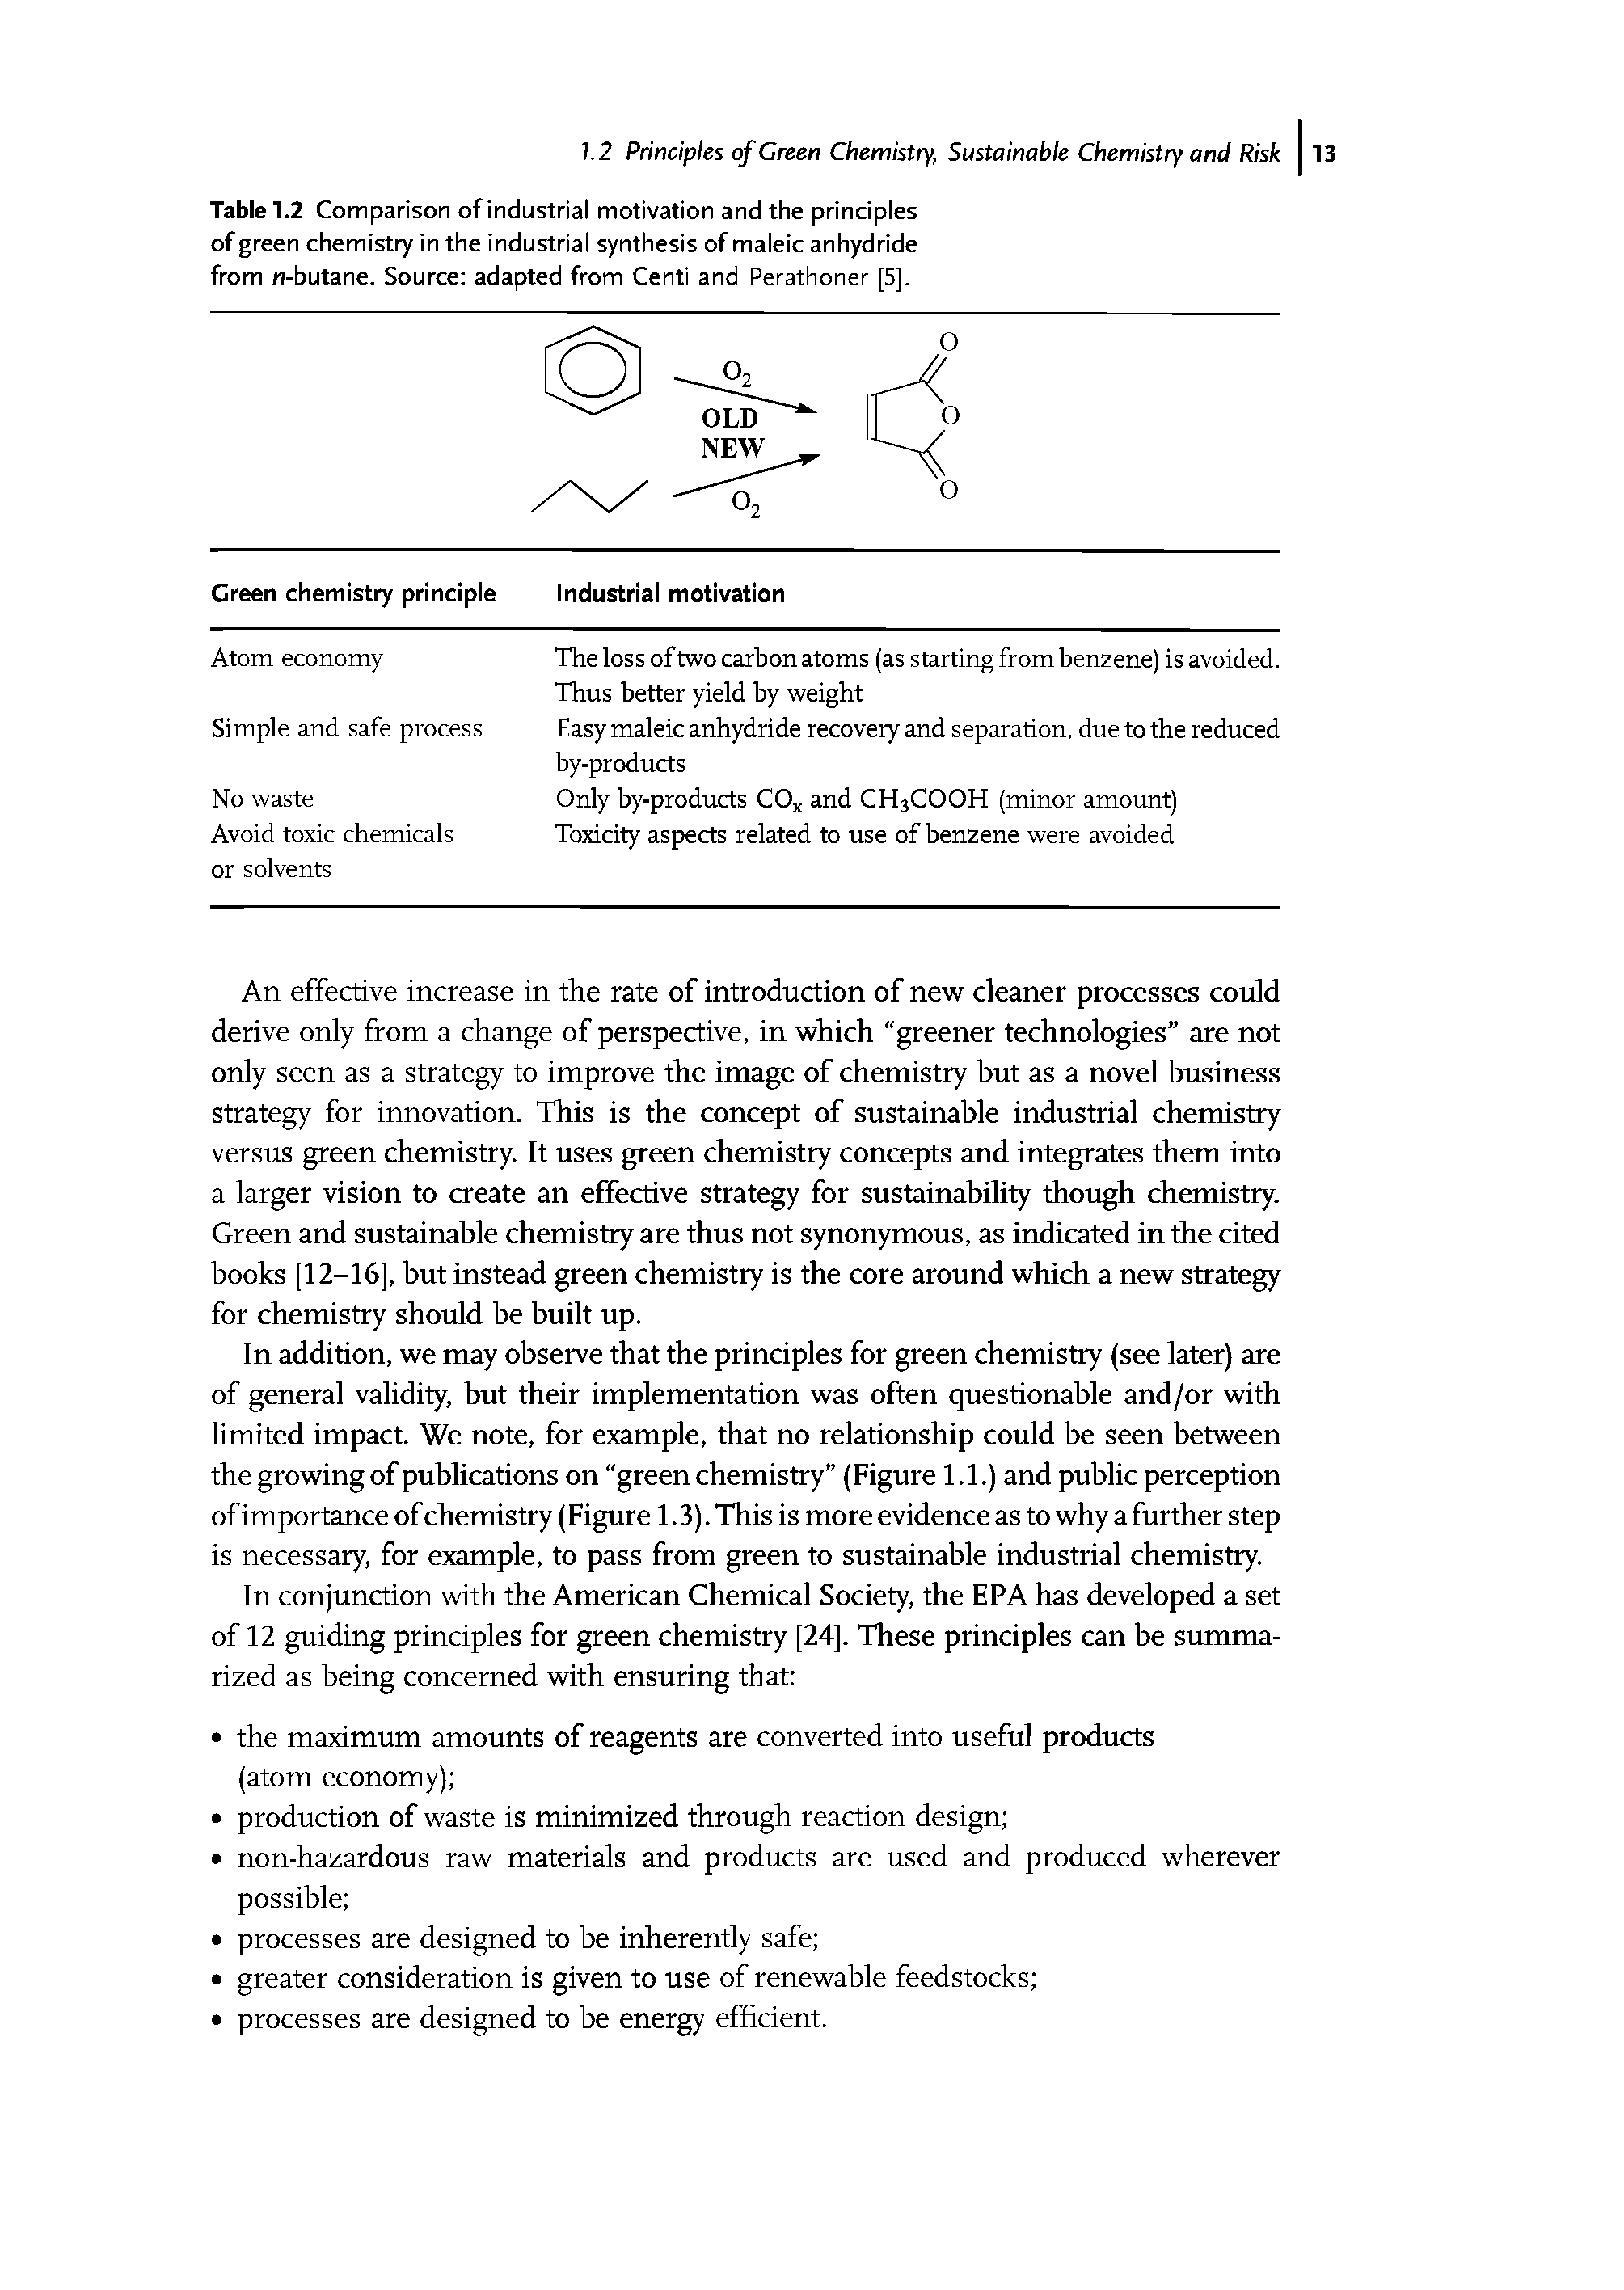 Table 1.2 Comparison of industrial motivation and the principles of green chemistry in the industrial synthesis of maleic anhydride from n-butane. Source adapted from Centi and Perathoner [5],...